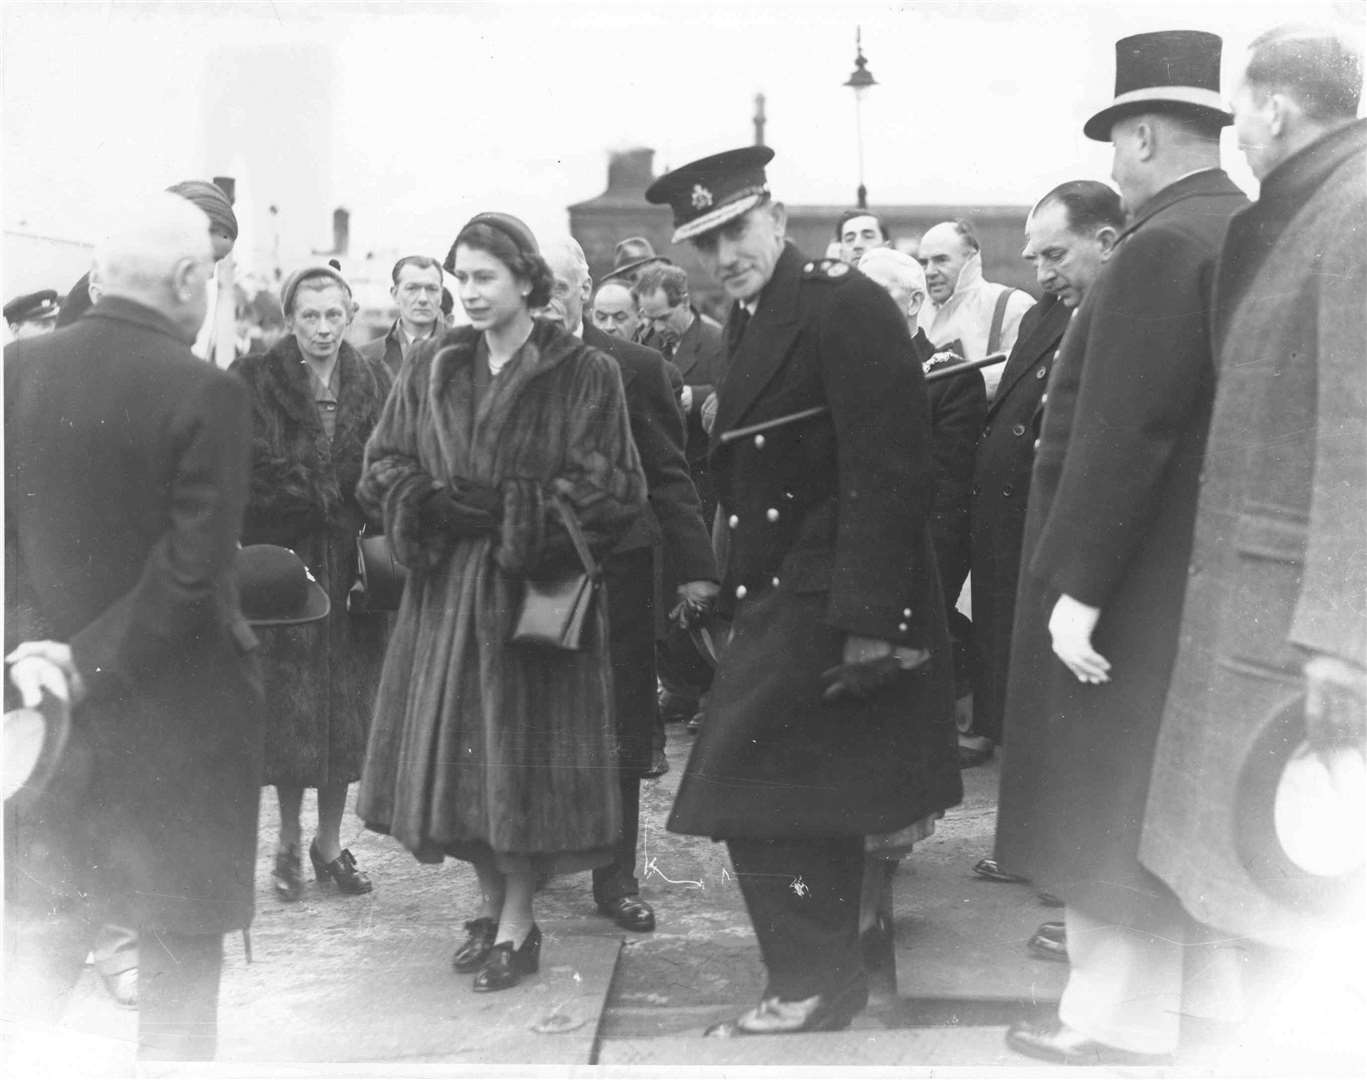 The week after disastrous floods hit Kent in February 1953, the Queen crossed the Thames from Purfleet to Gravesend in a Port of London Authority launch to see the damage. She was the first reigning monarch to make an official visit to Gravesend in 95 years. She talked to so many stricken residents that she was two hours behind schedule by the time she set off for Erith and Belvedere